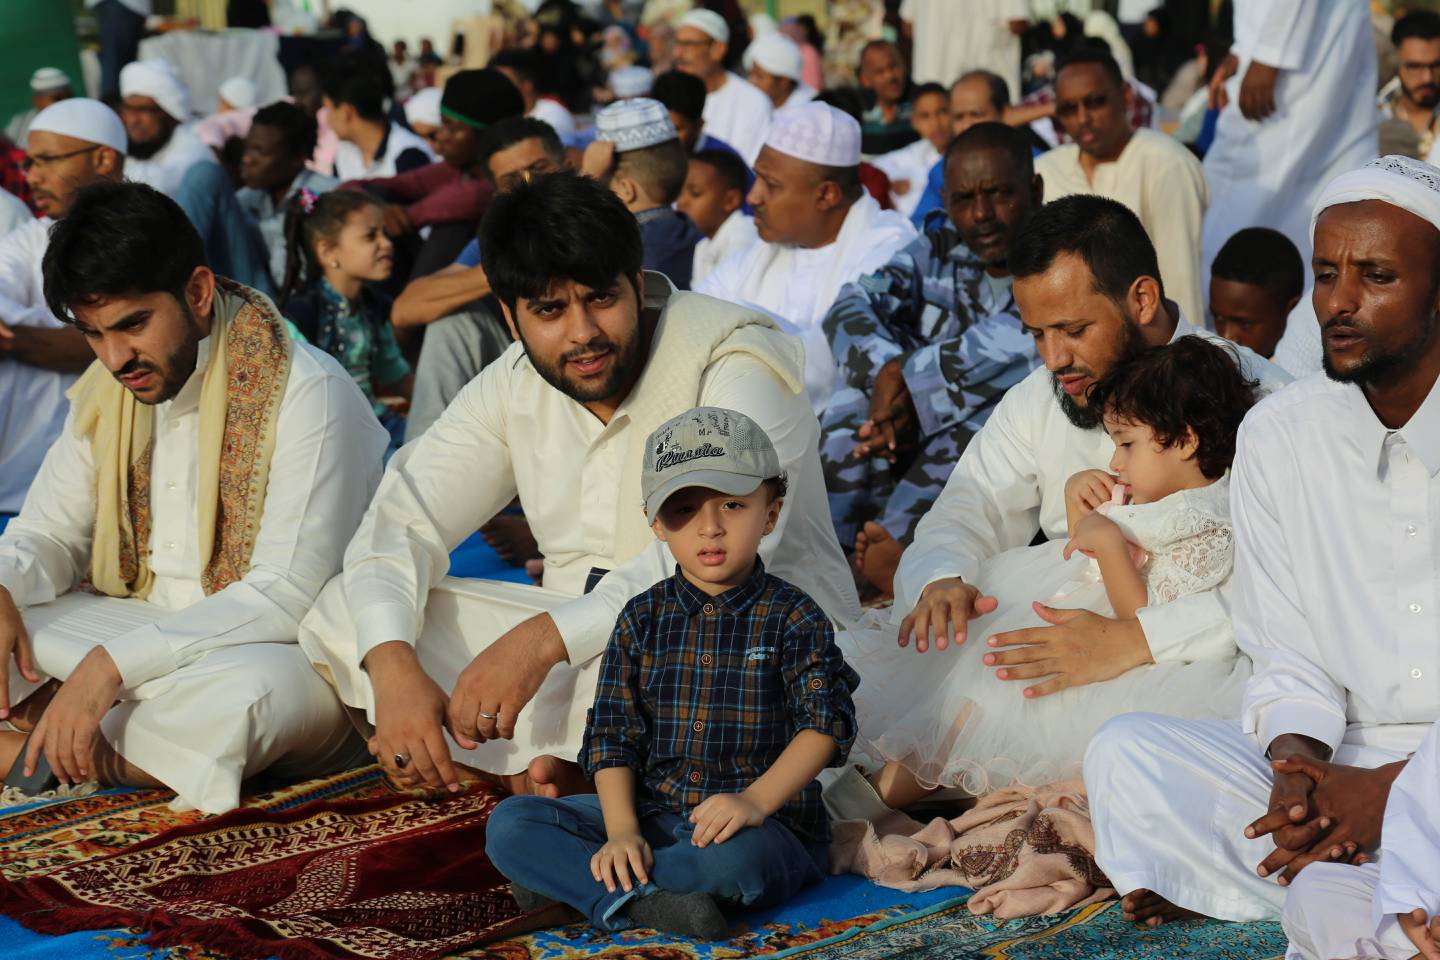 While children might not necessarily be able to join in full prayers, many parents enjoy bringing their children to the mosque to experience this important part of the holy month. Unsplash